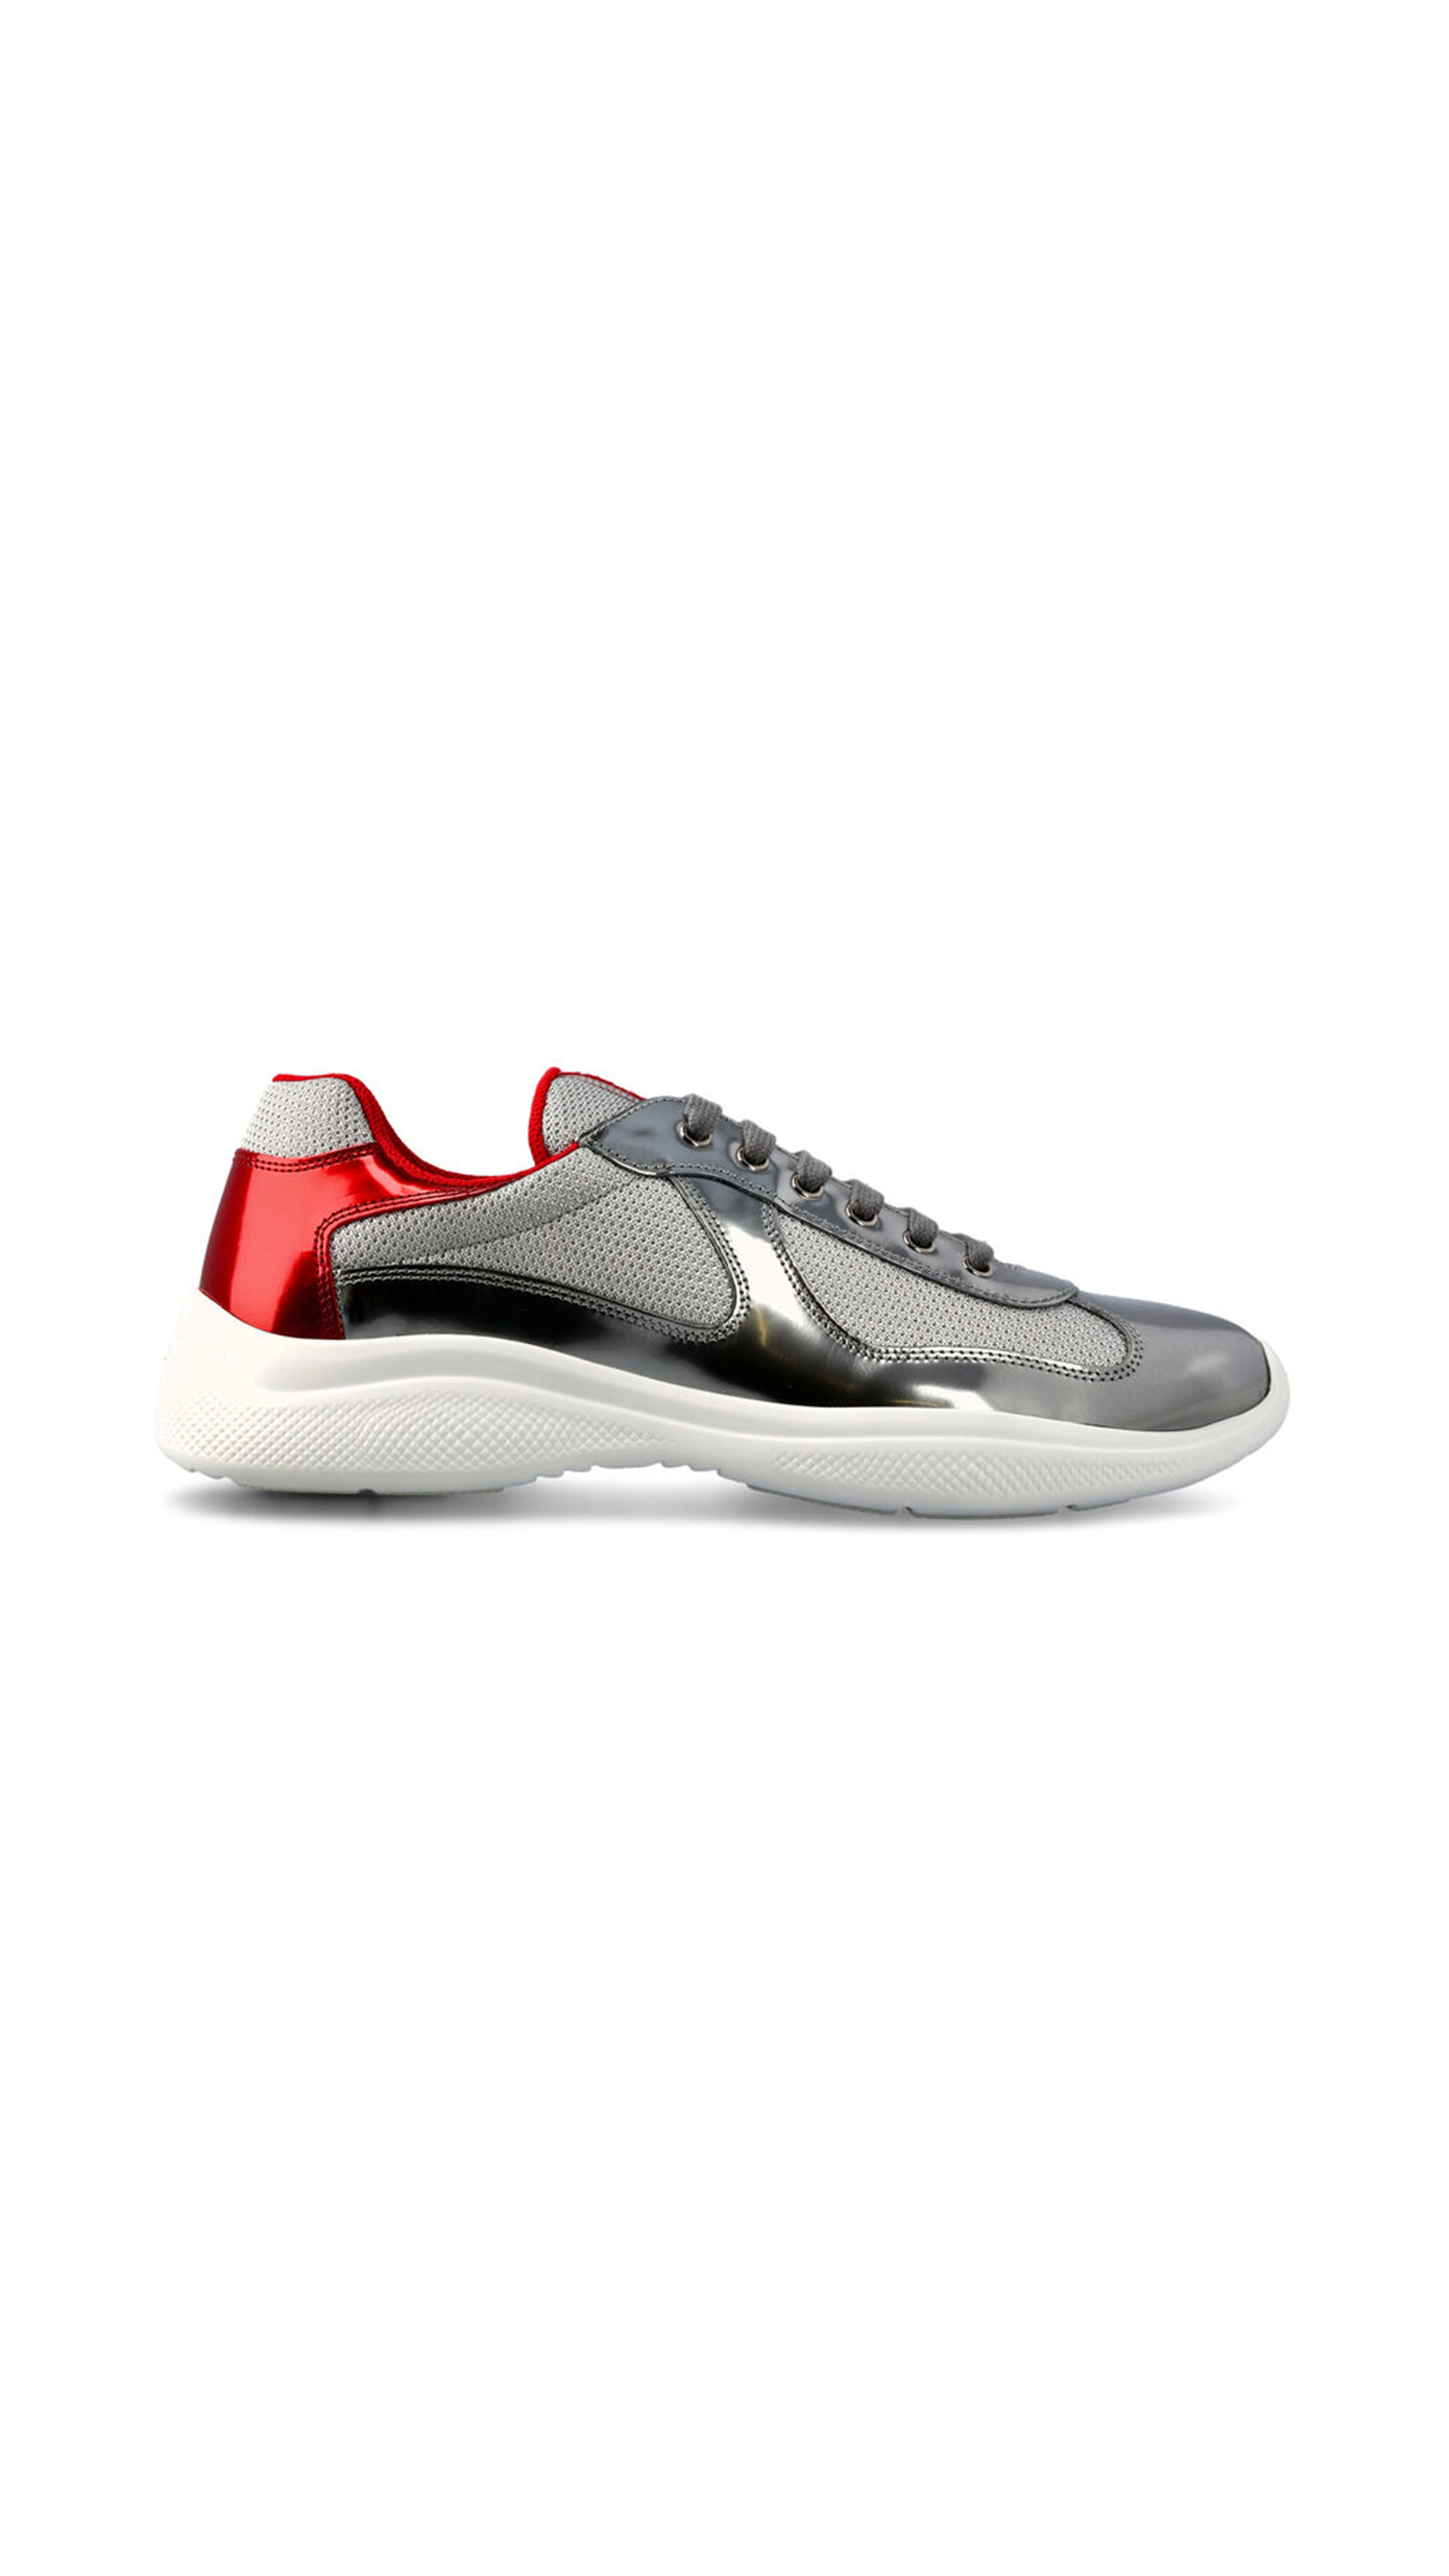 America's Cup Sneakers in Metallic Leather and Technical Fabric - Silver/Red